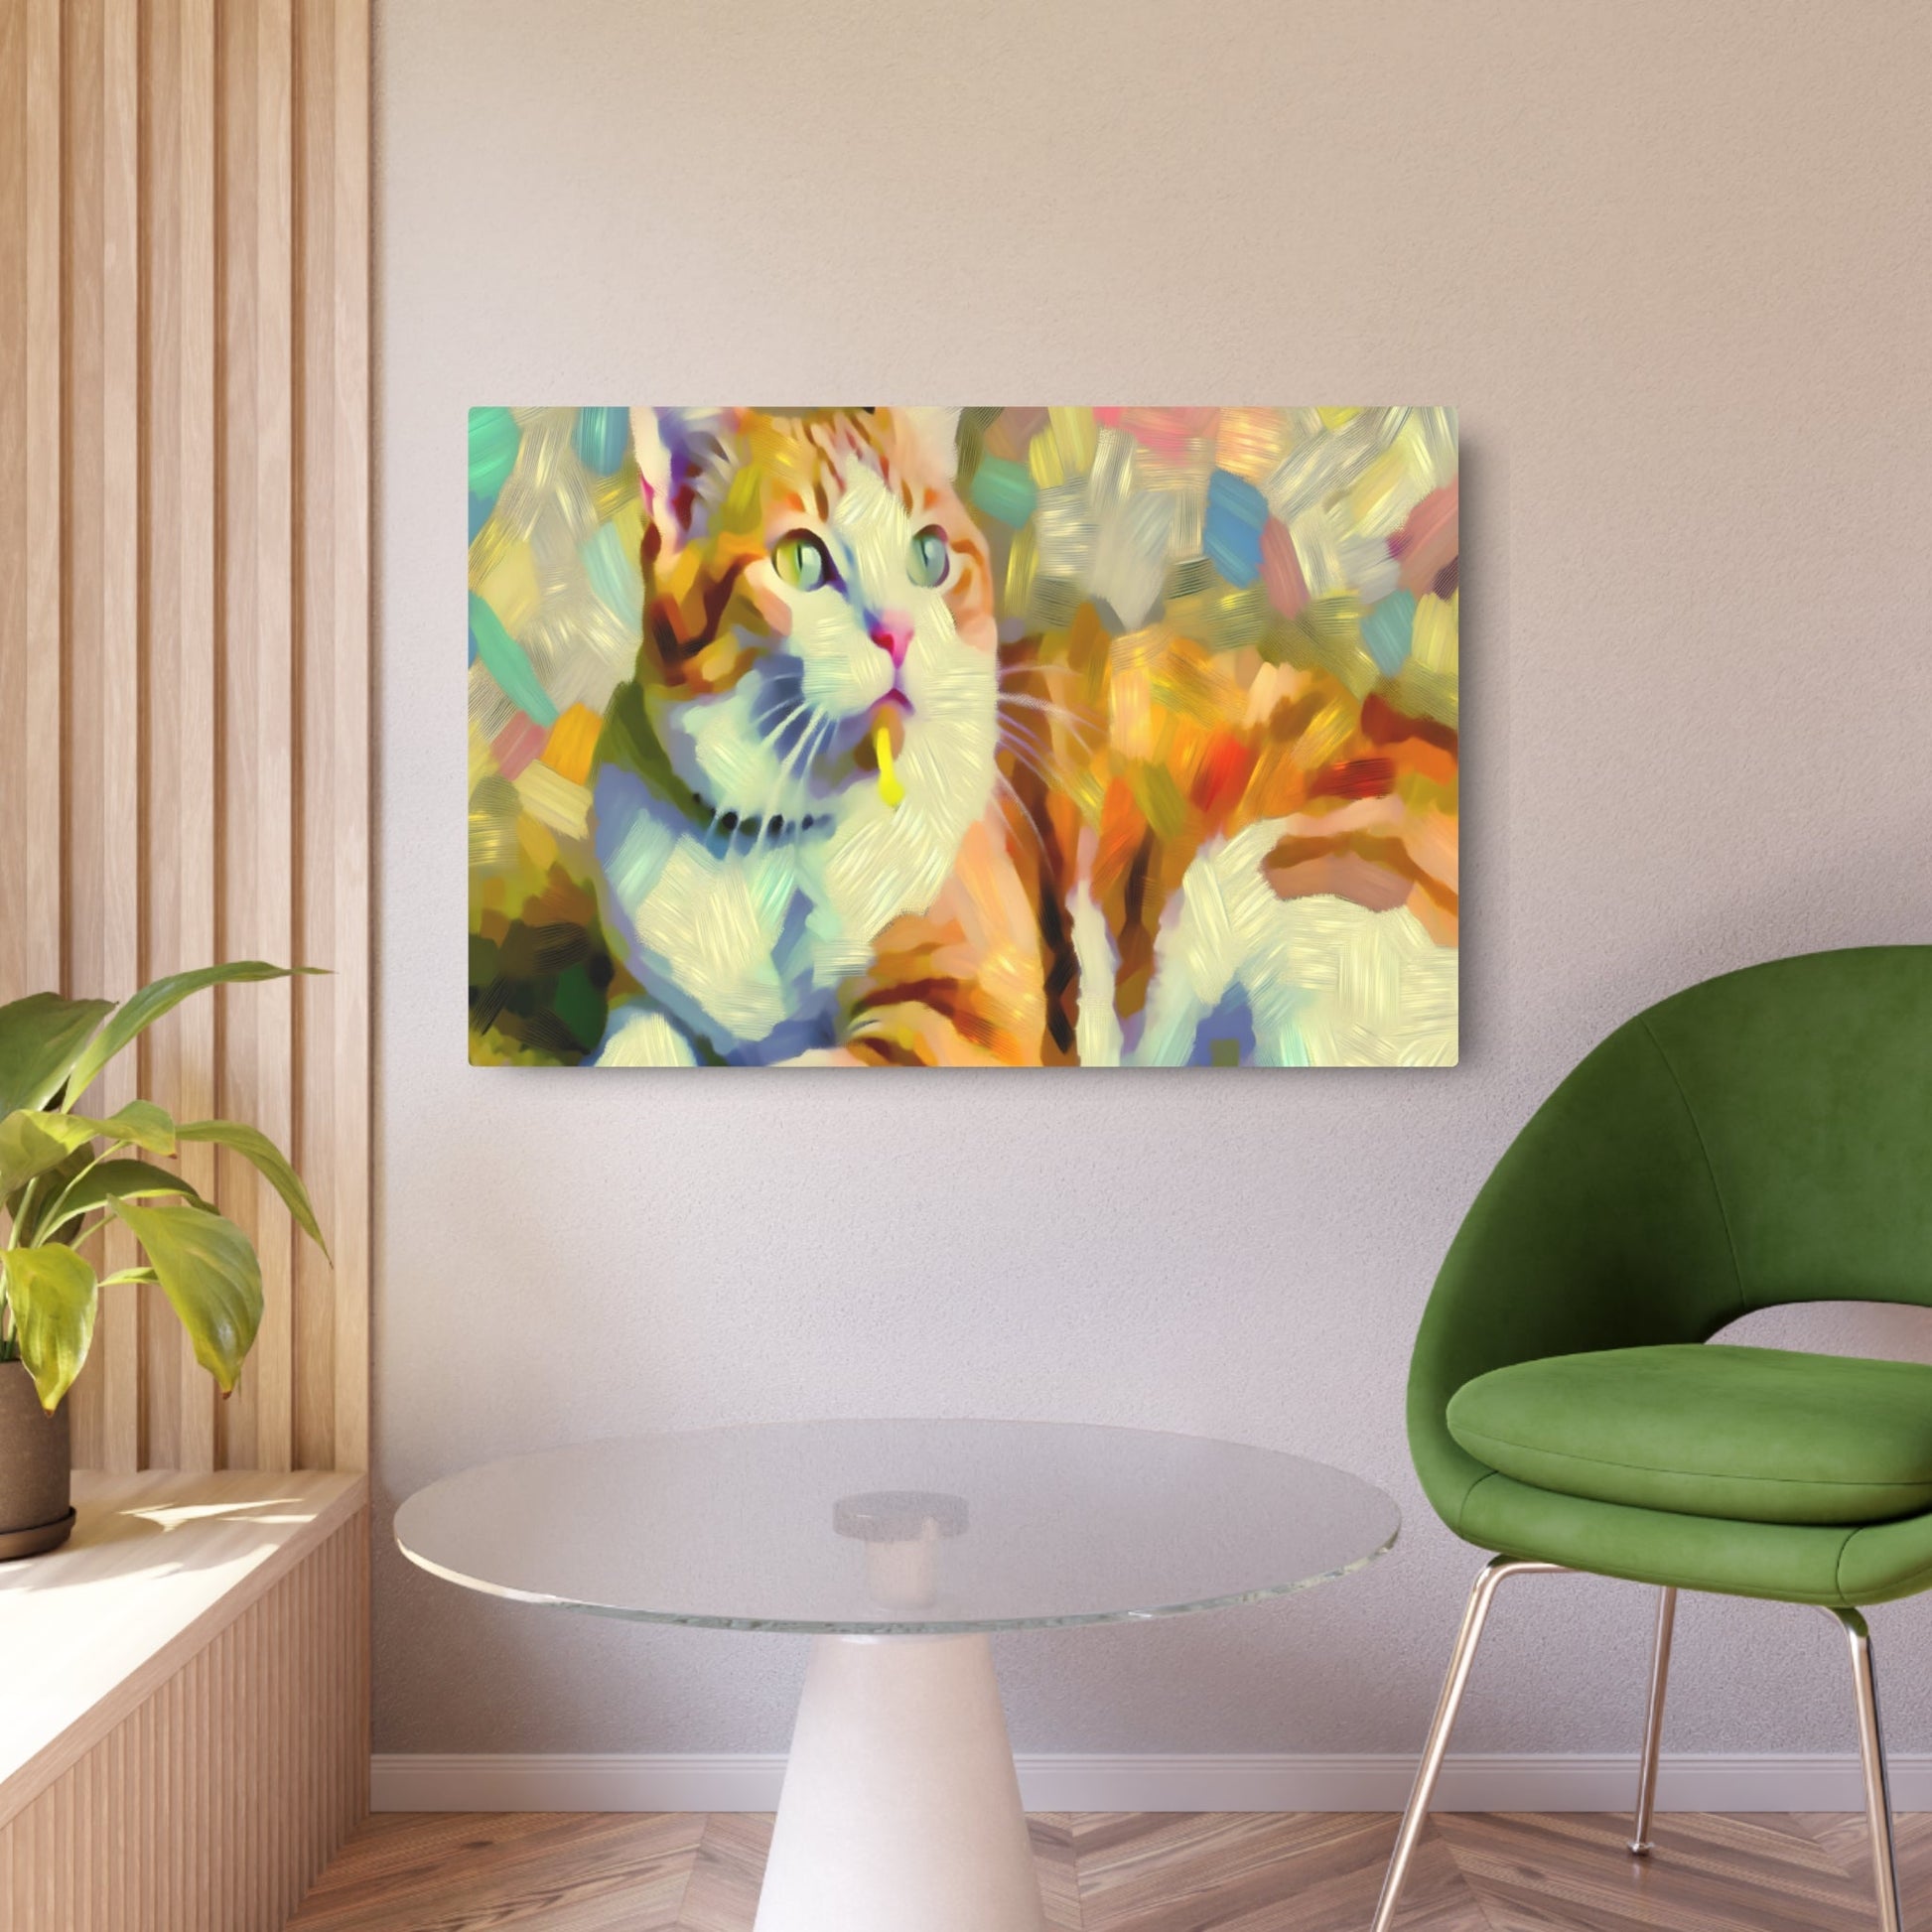 Metal Poster Art | "Impressionist Style Cat Artwork - Western Art Styles, Impressionism Collection" - Metal Poster Art 36″ x 24″ (Horizontal) 0.12''